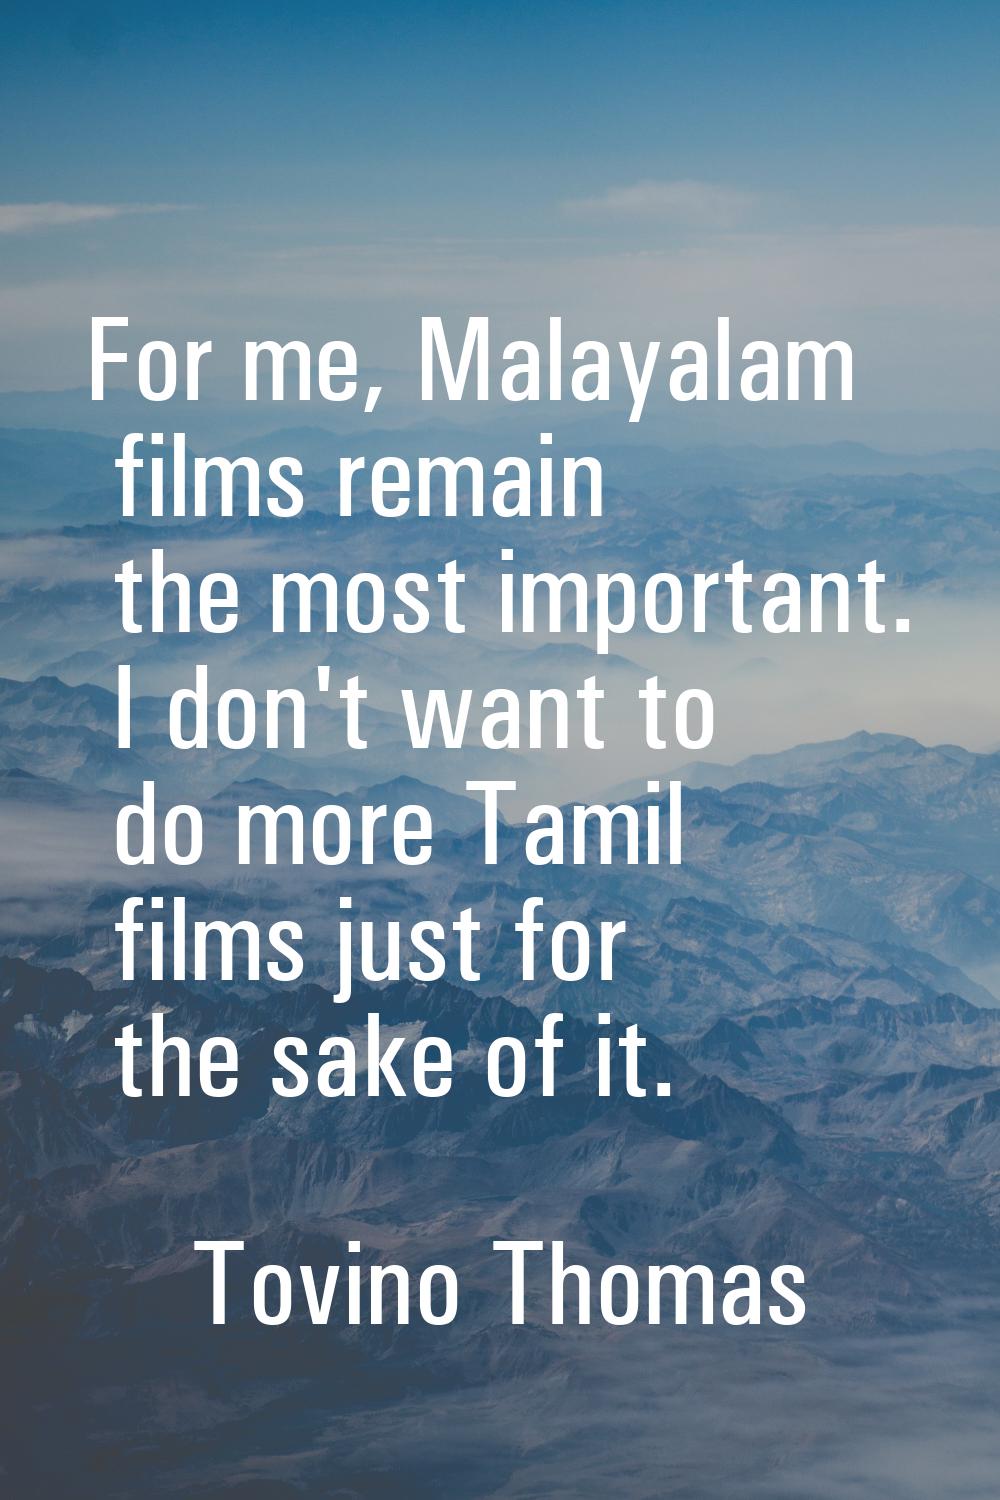 For me, Malayalam films remain the most important. I don't want to do more Tamil films just for the